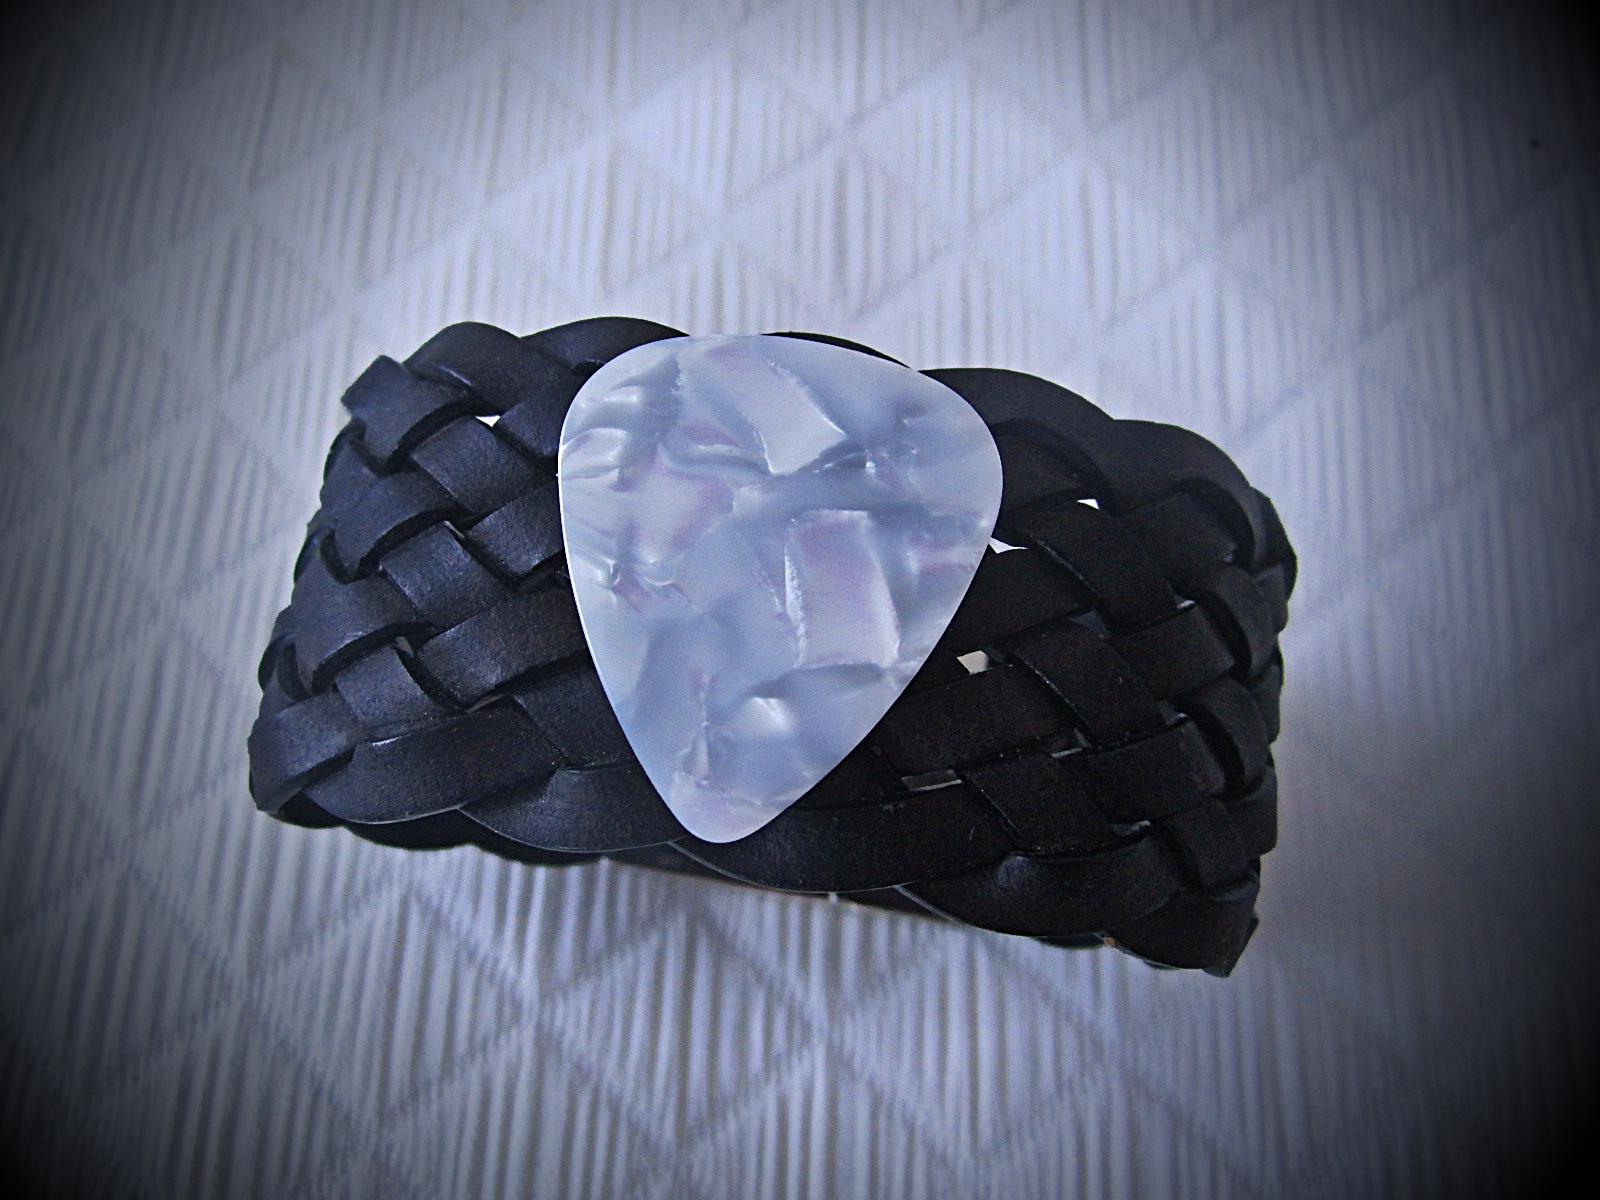 Chunky Magnetic Leather Bracelet with White Guitar Pick